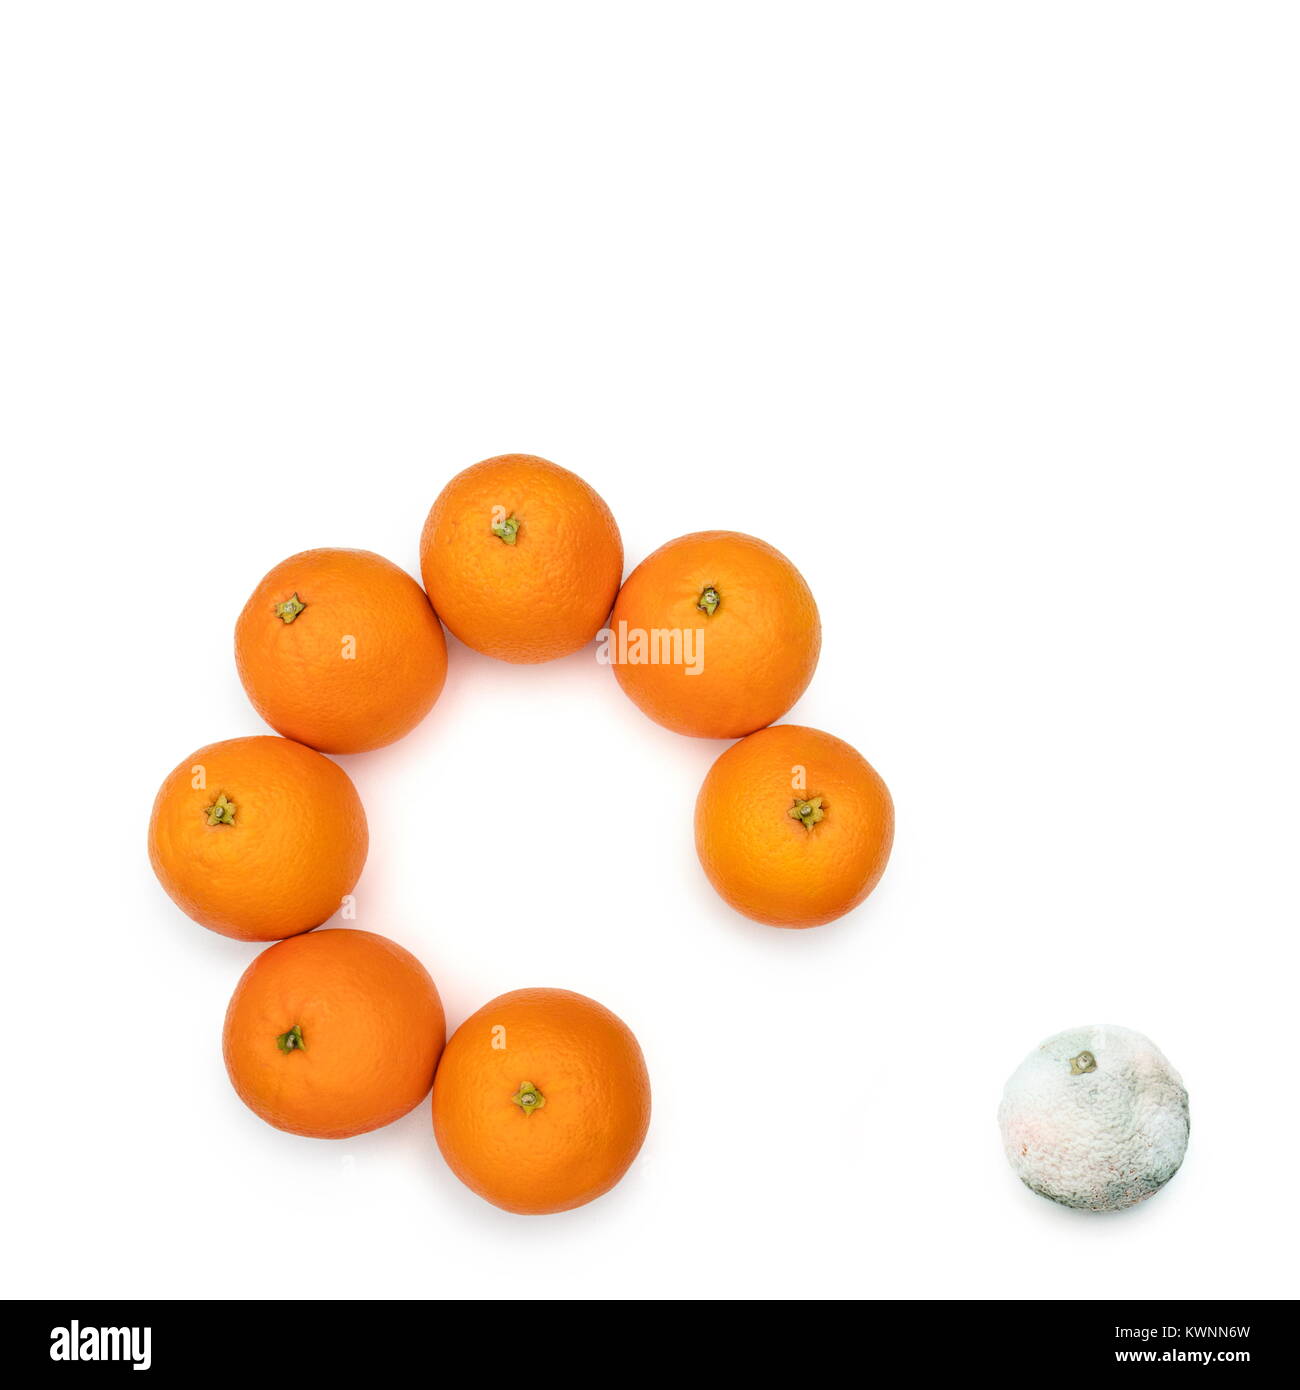 Moldy orange removed from the circle of the good ones. Concept for the bad ones out of the good ones. Stock Photo